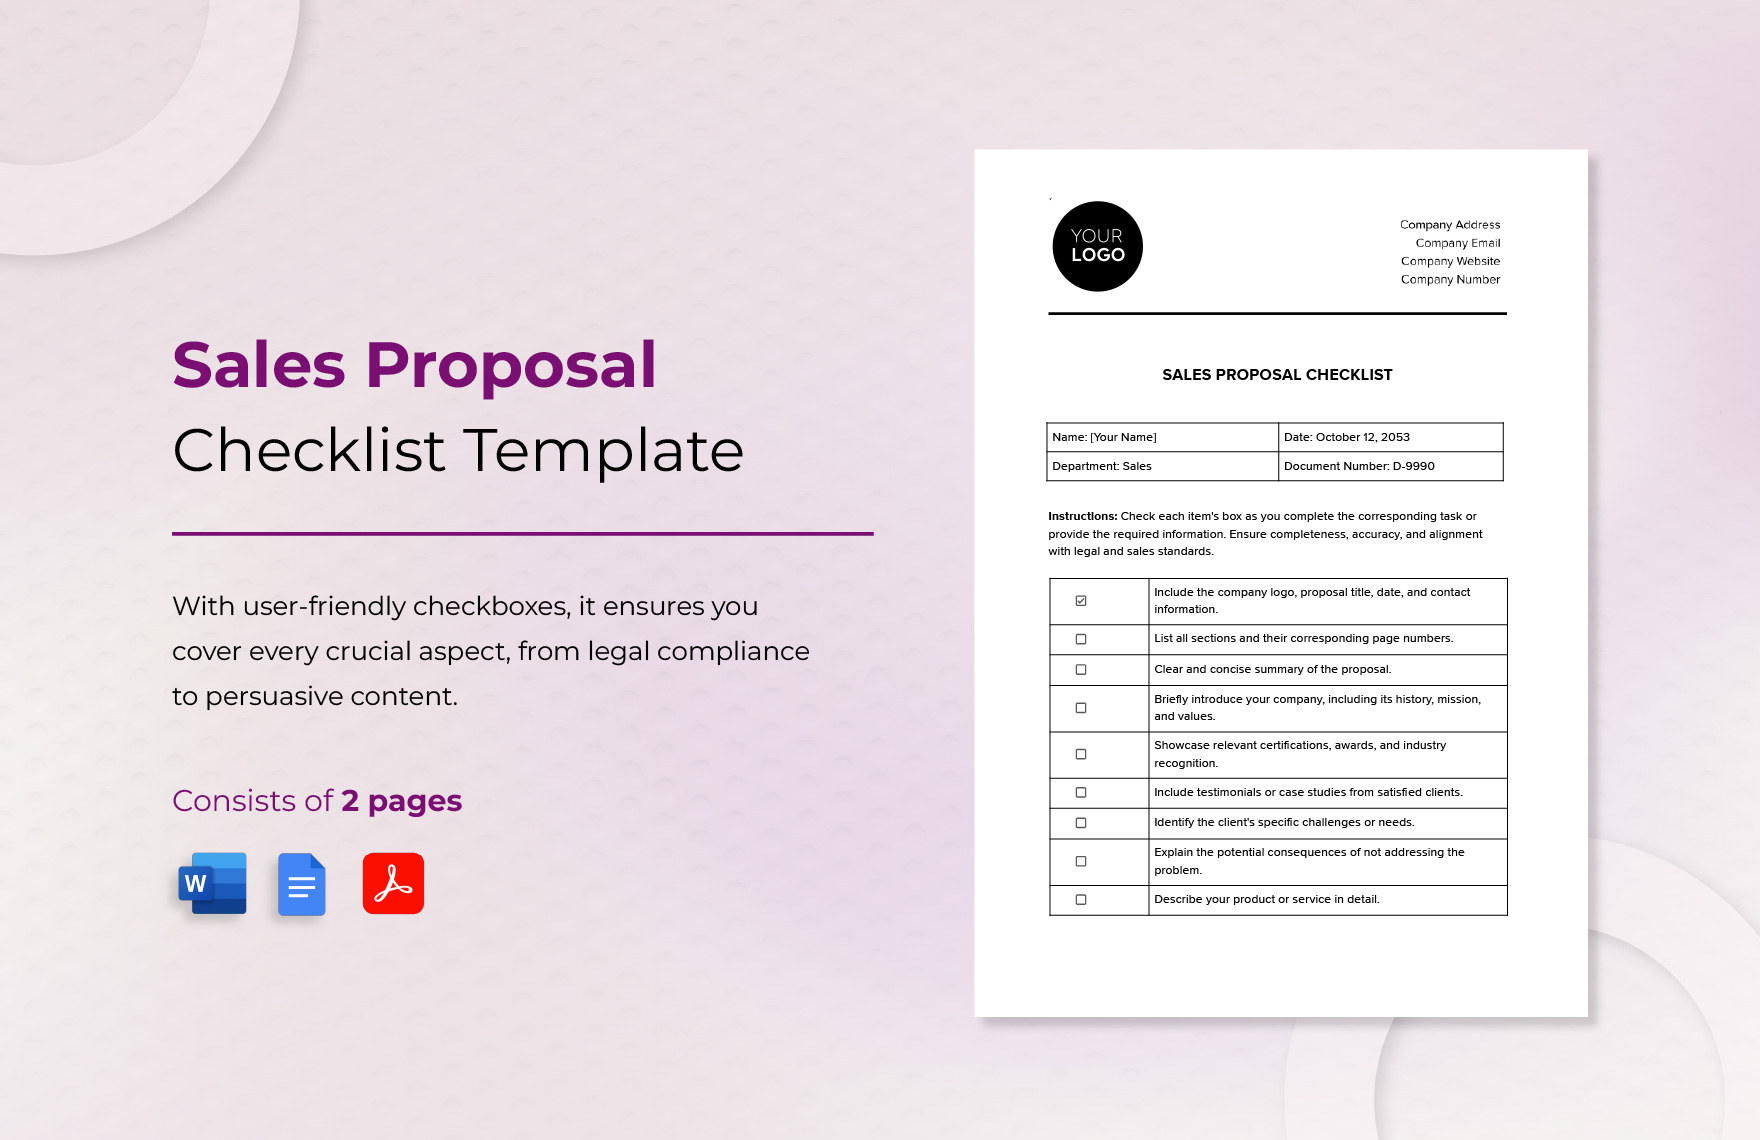 Sales Proposal Checklist Template in Word, Google Docs, PDF